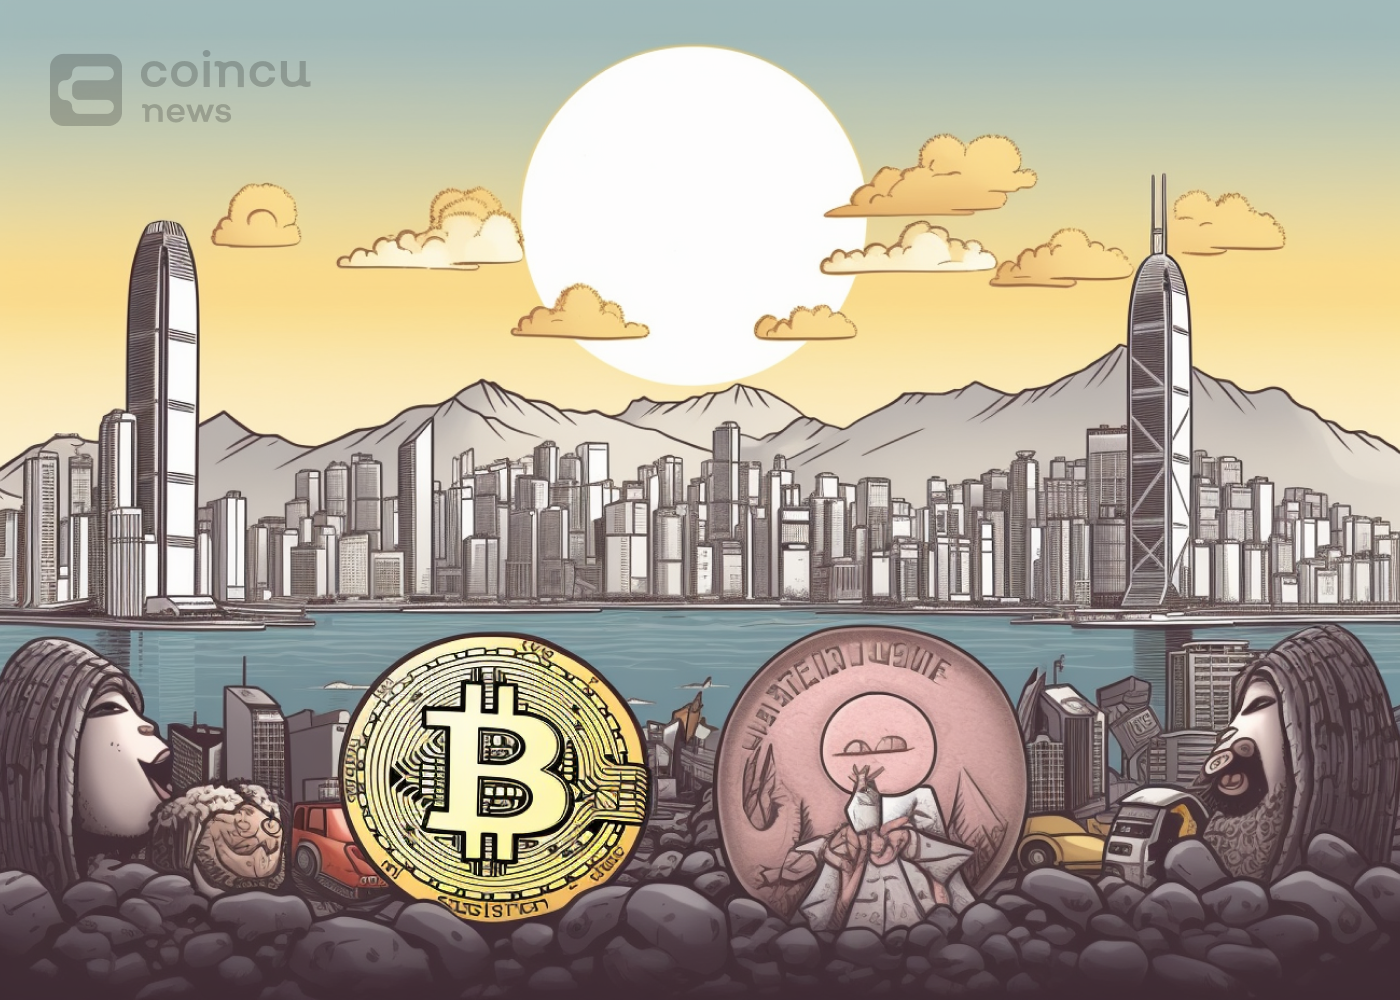 Hong Kong's First Licensed Platform HashKey Exchange Breaks Ground With BTC Trading